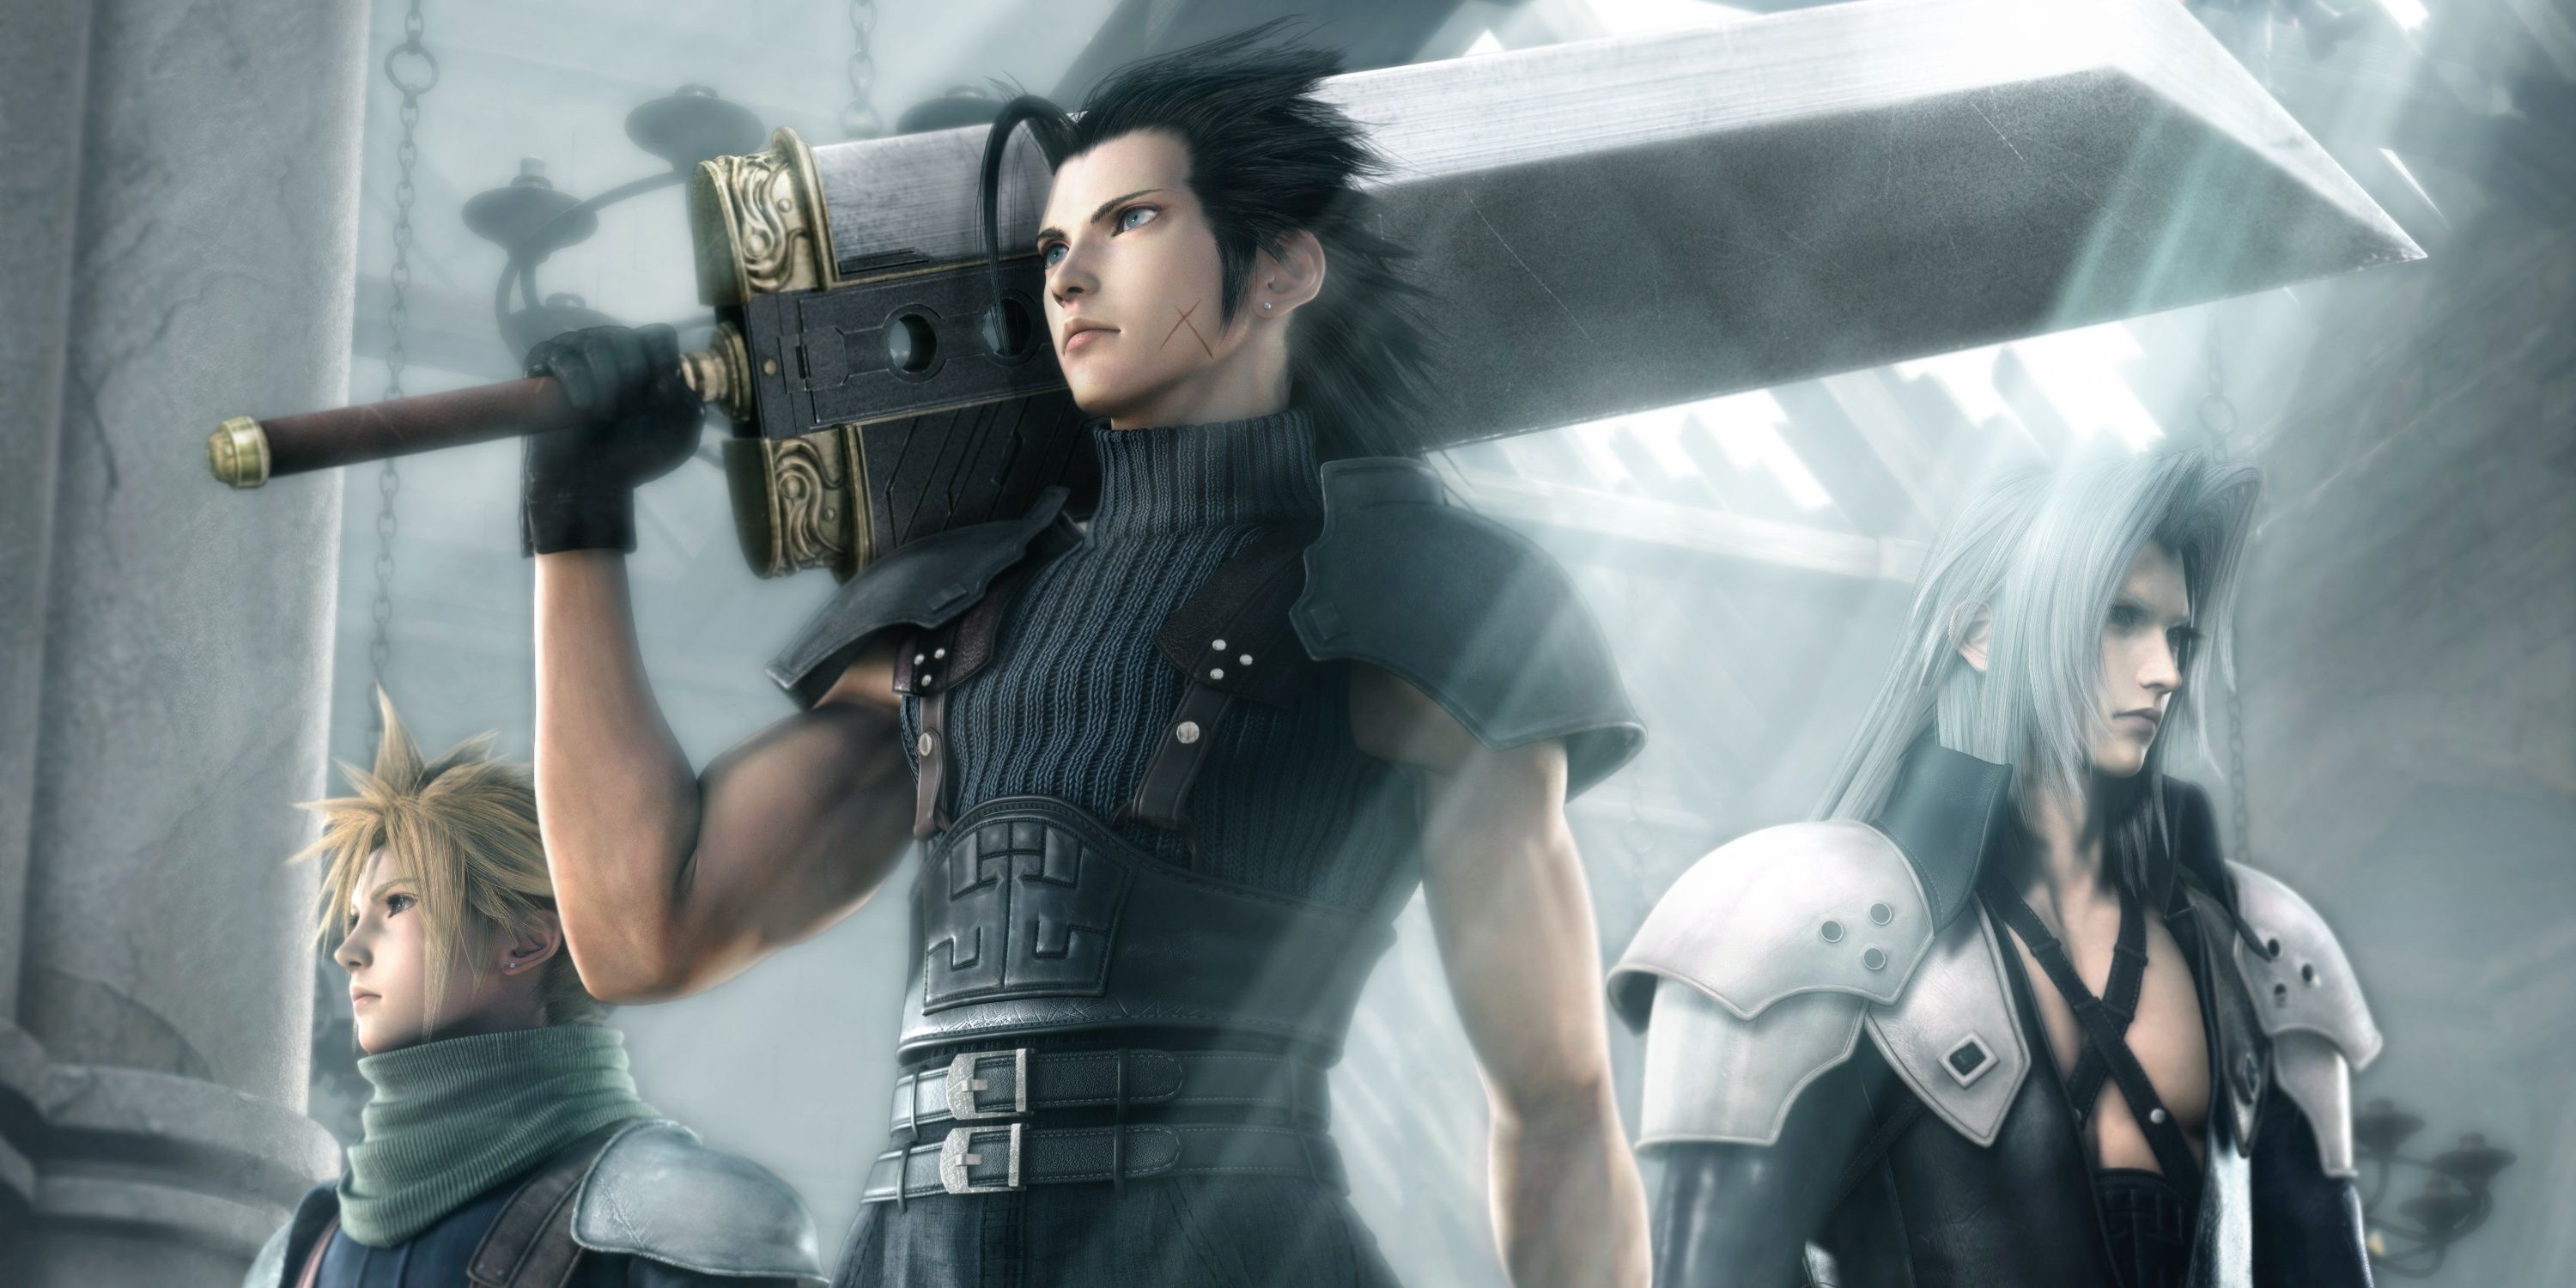 Zack, Cloud, and Sephiroth in Crisis Core: Final Fantasy 7